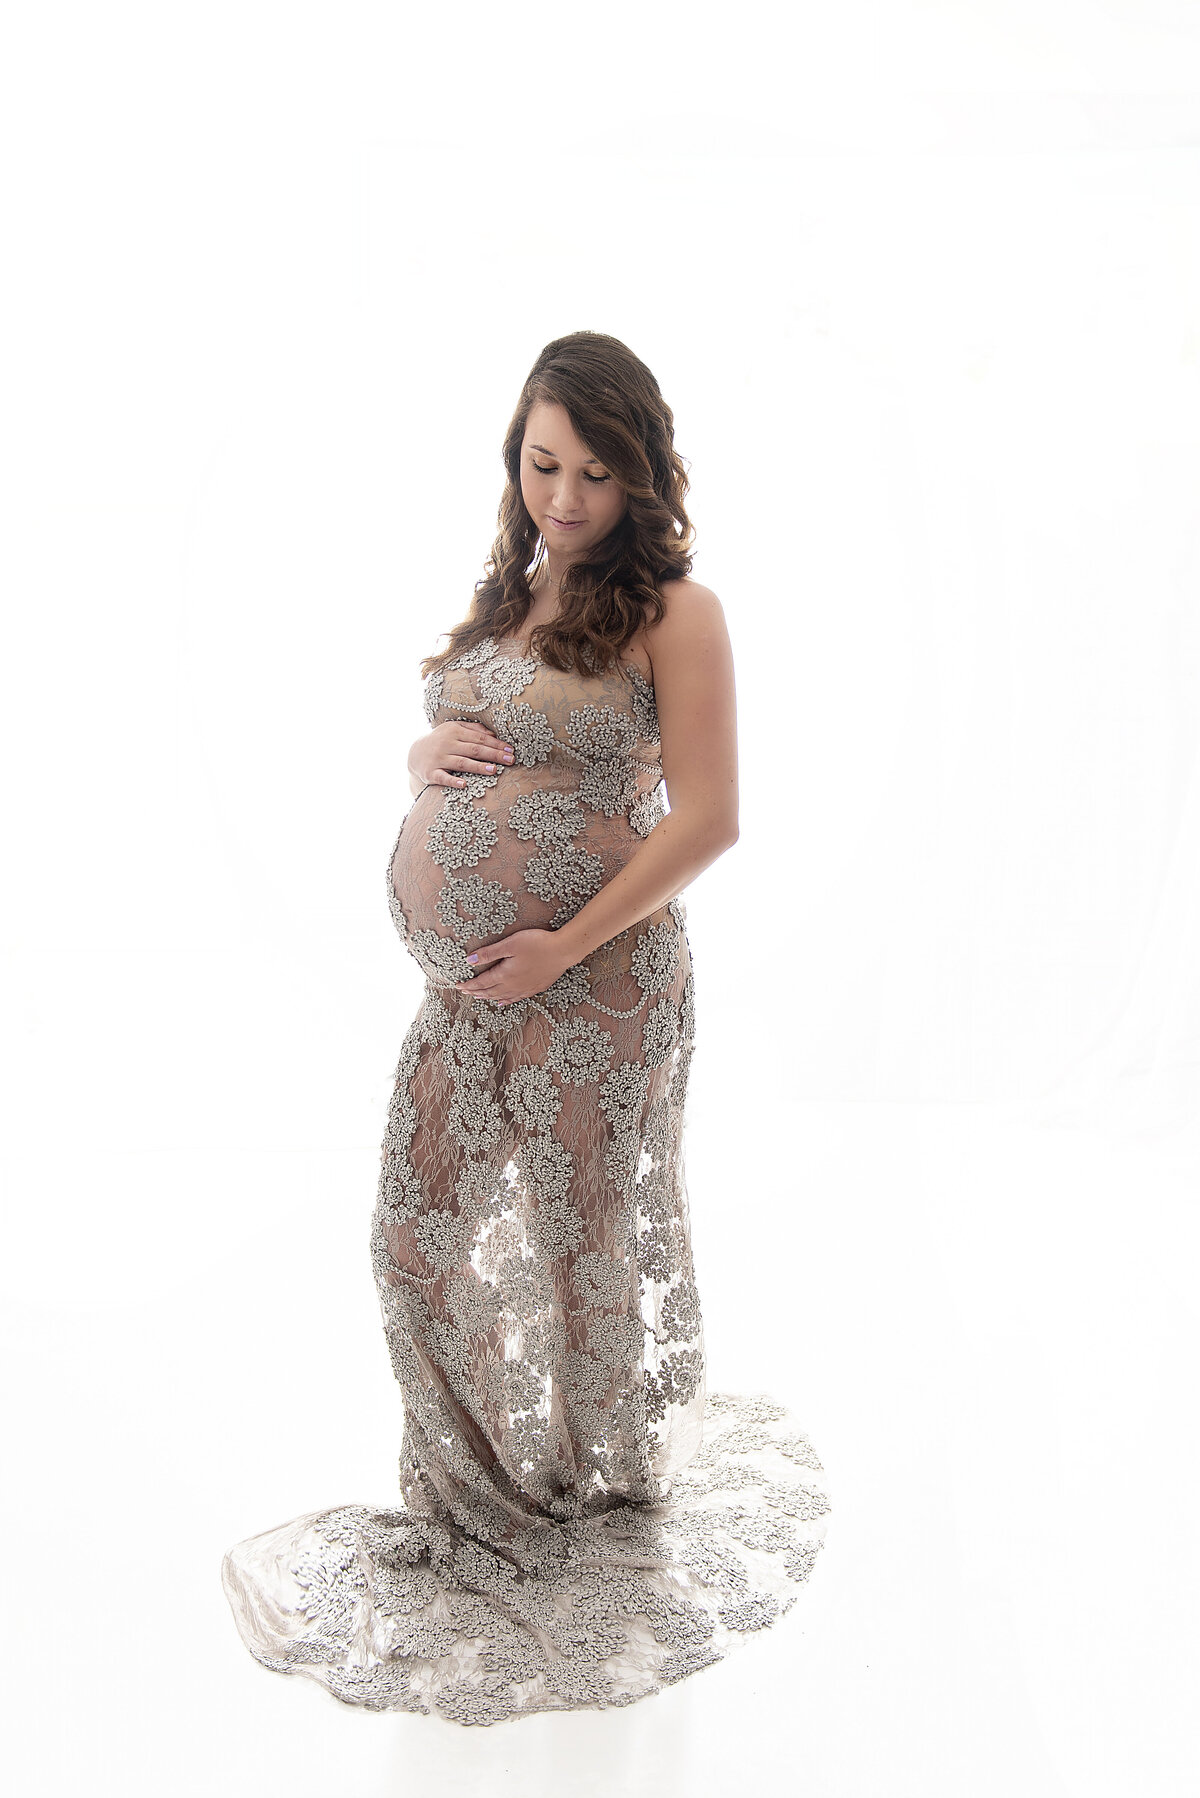 A mother to be smiles down at her bump while wearing a gray lace gown